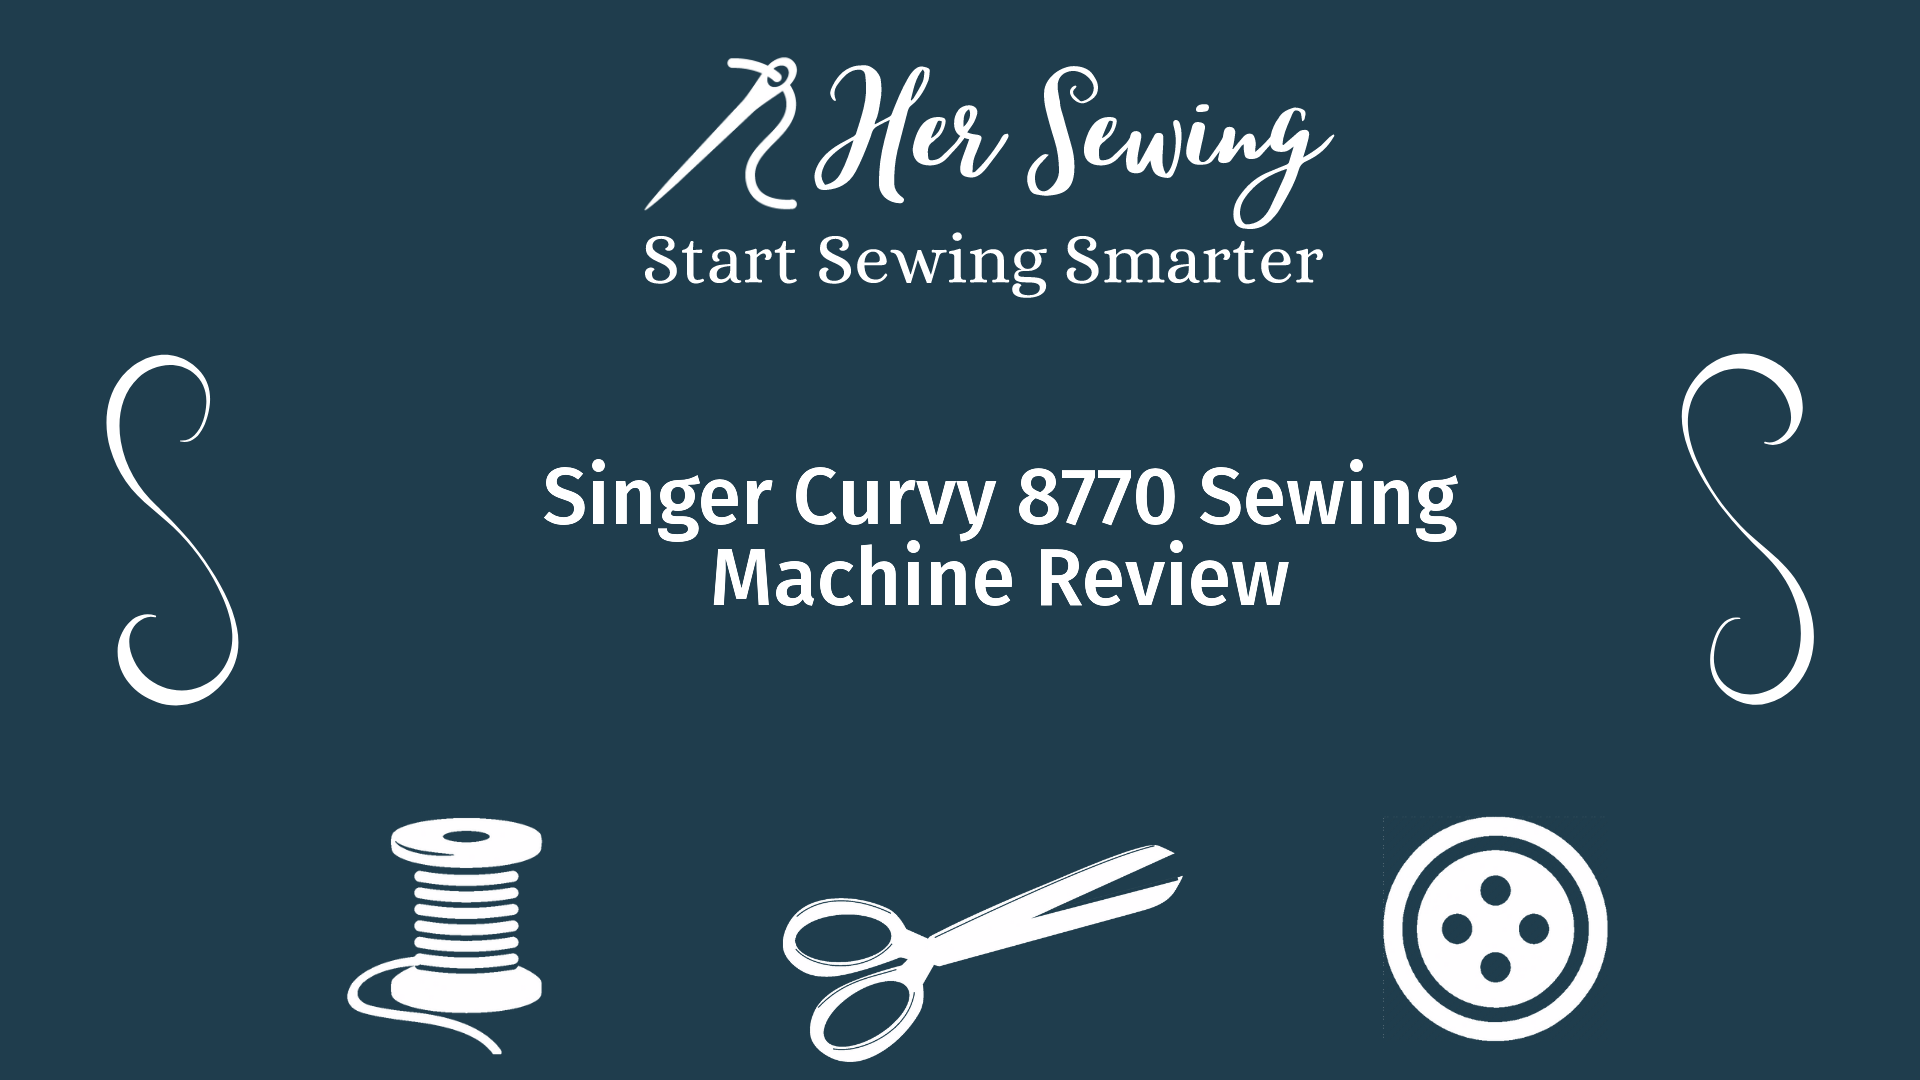 Singer Curvy 8770 Sewing Machine Review